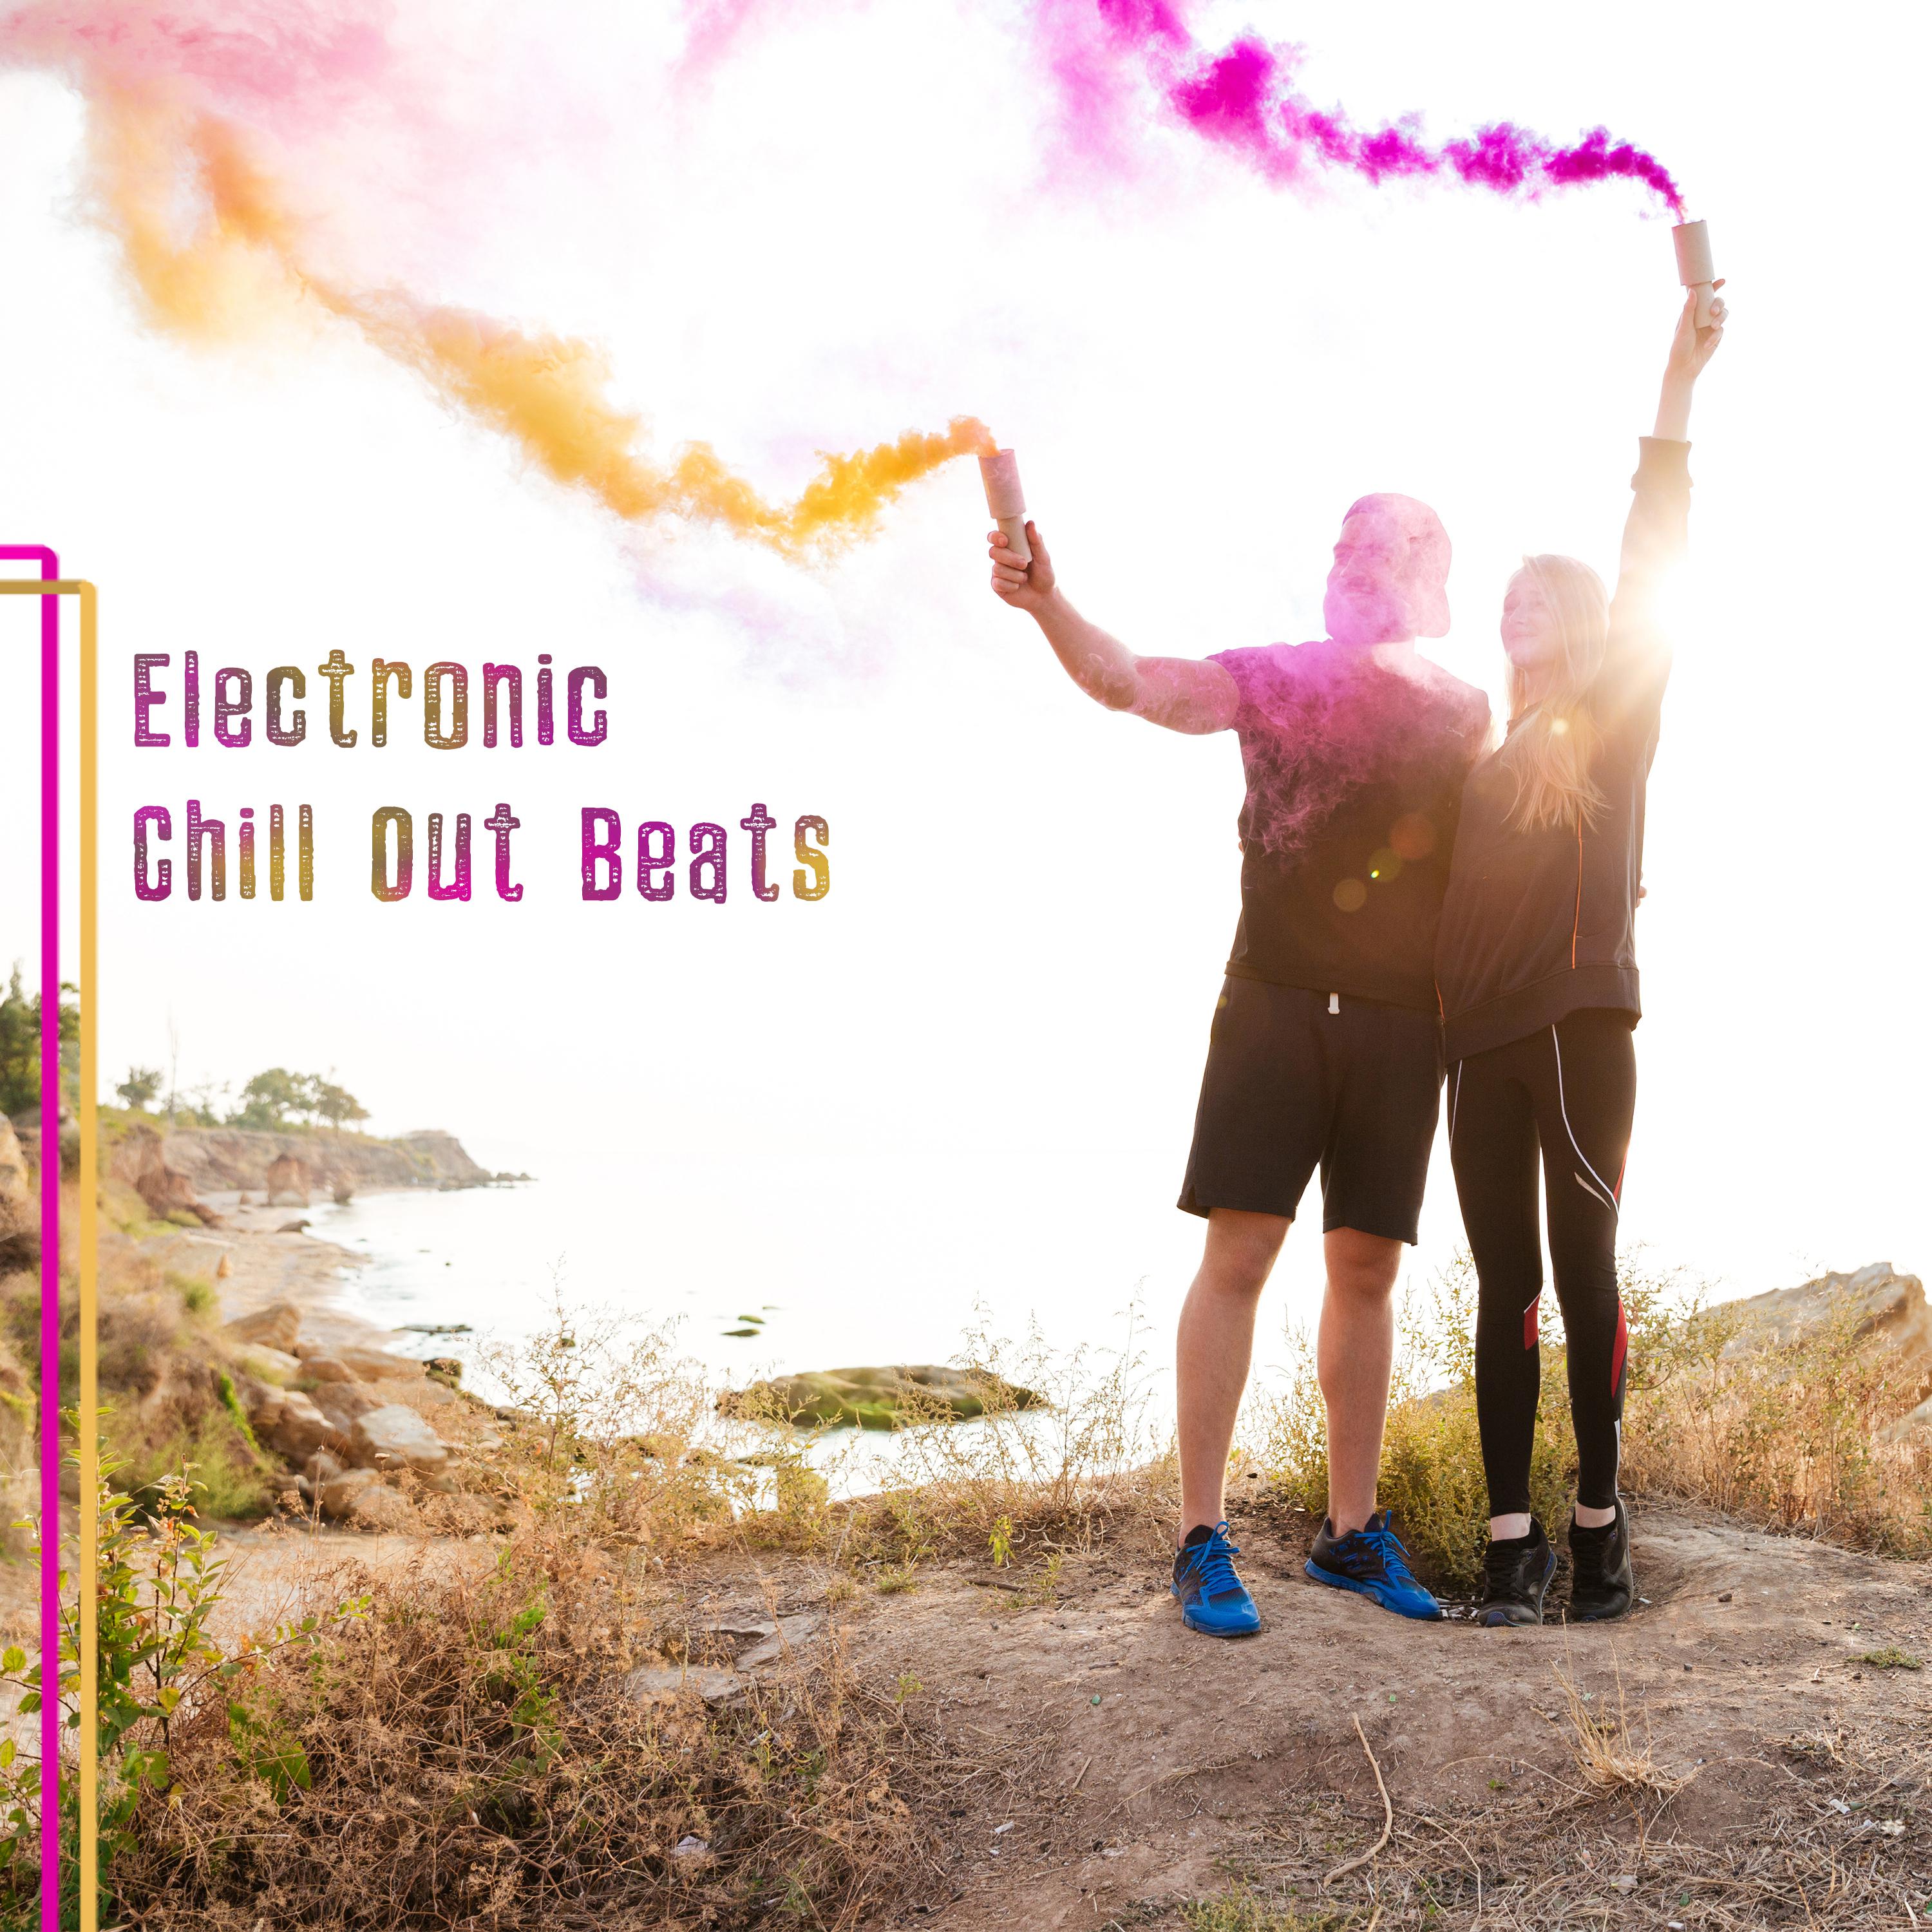 Electronic Chill Out Beats – Soft Summer Sounds to Relax, Beach Lounge, Electronic Melodies